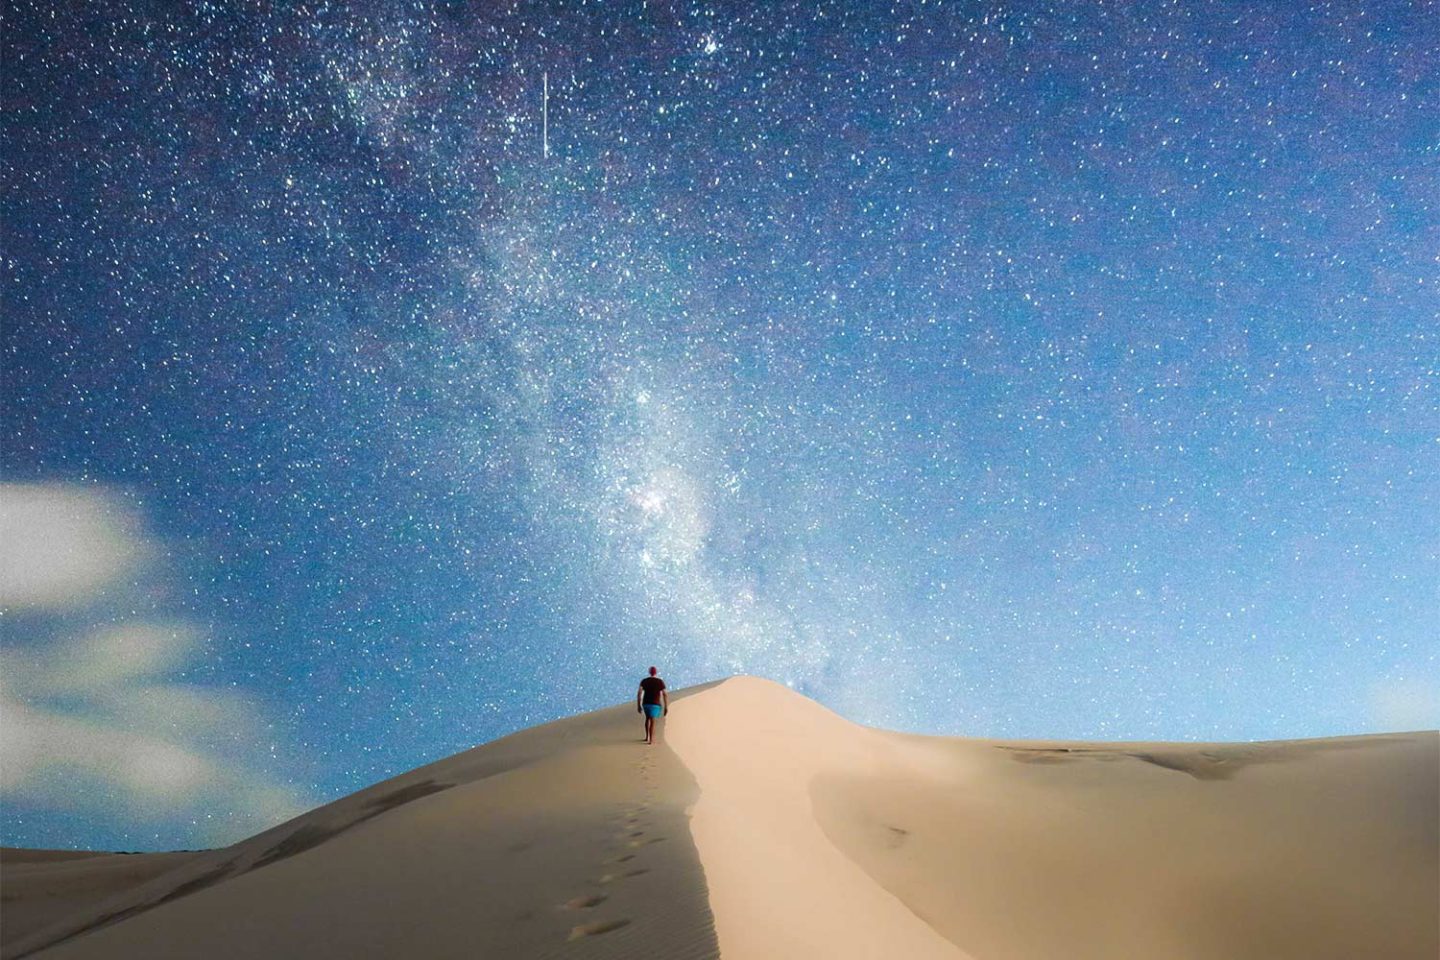 A man walks along sand dunes at night towards the Milky Way that lights up the night sky.